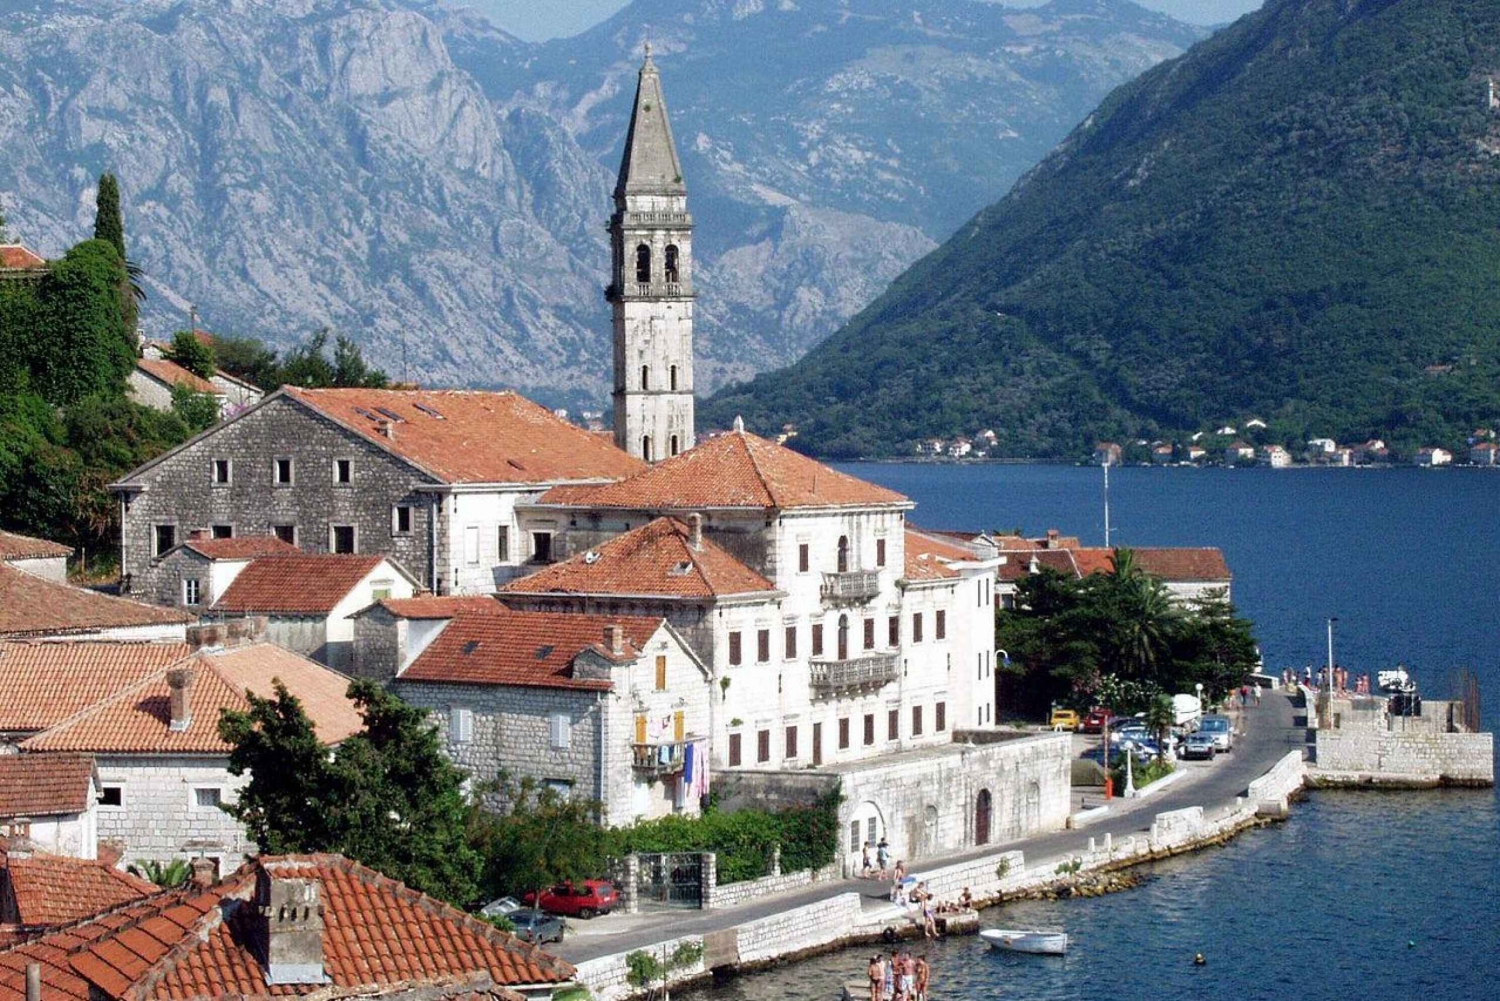 Farm Oysters and Mussels ( Perast and Lady of the rocks )